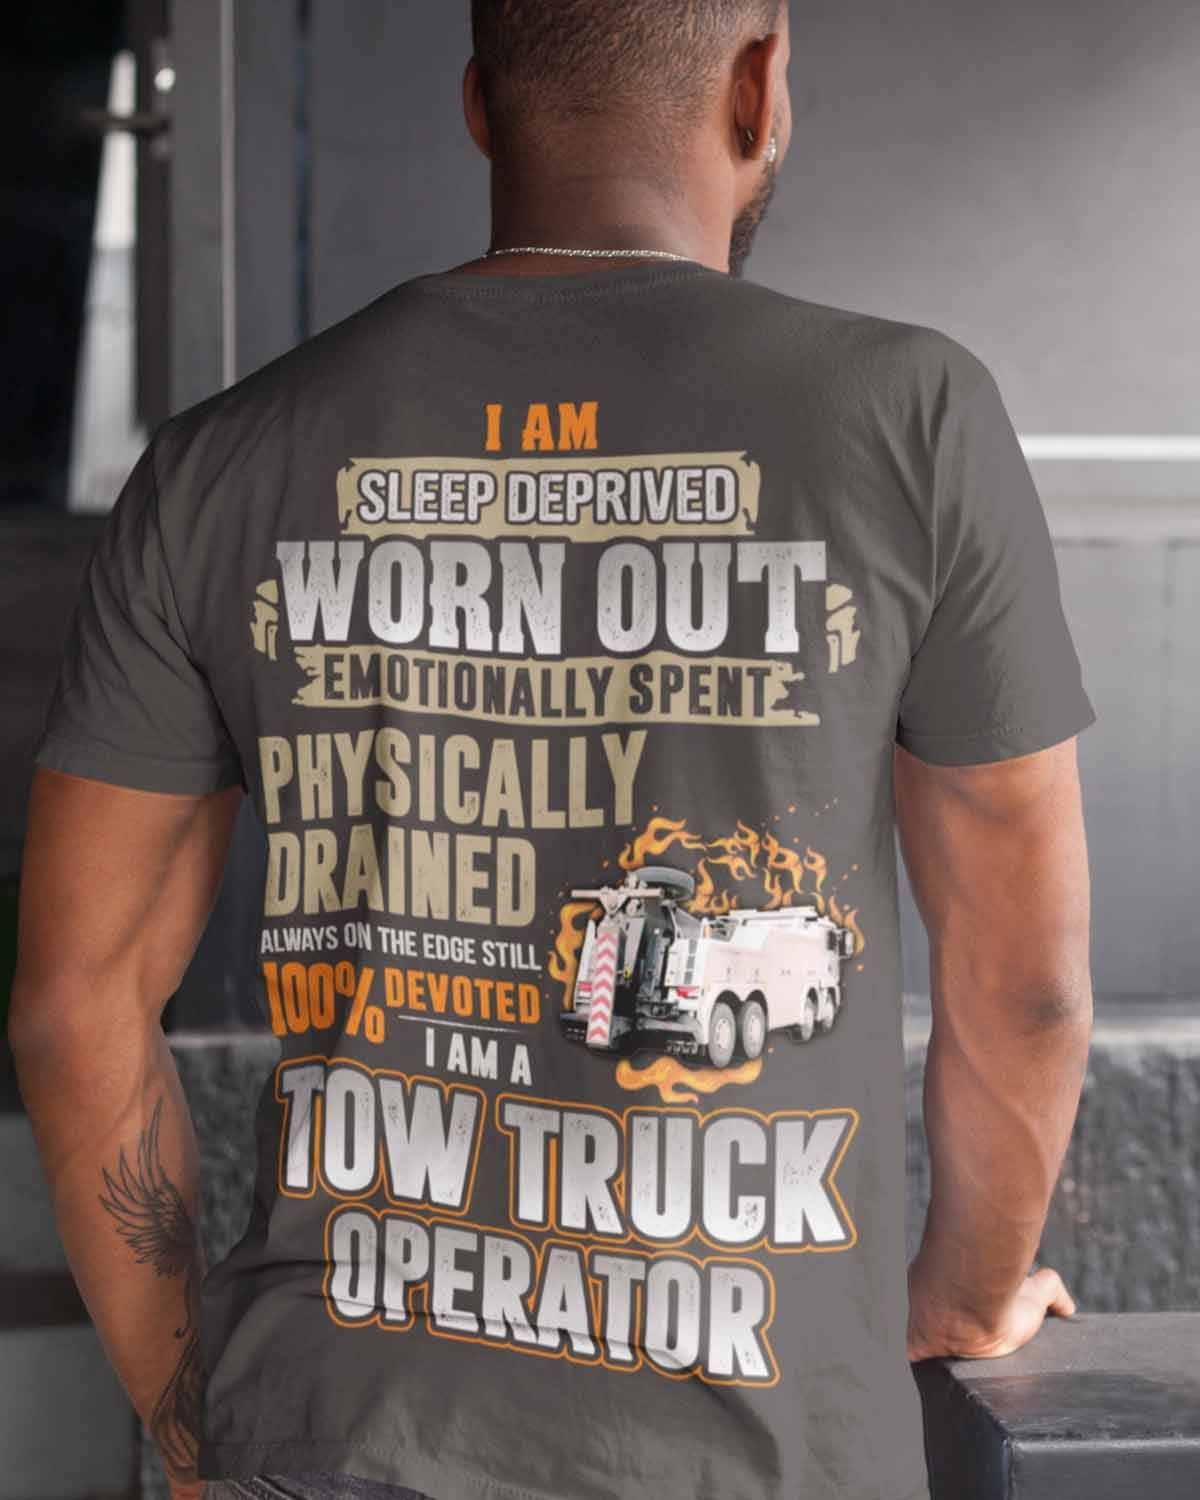 Tow Truck Operator - I am sleep deprived worn out emotionally spent physically drained